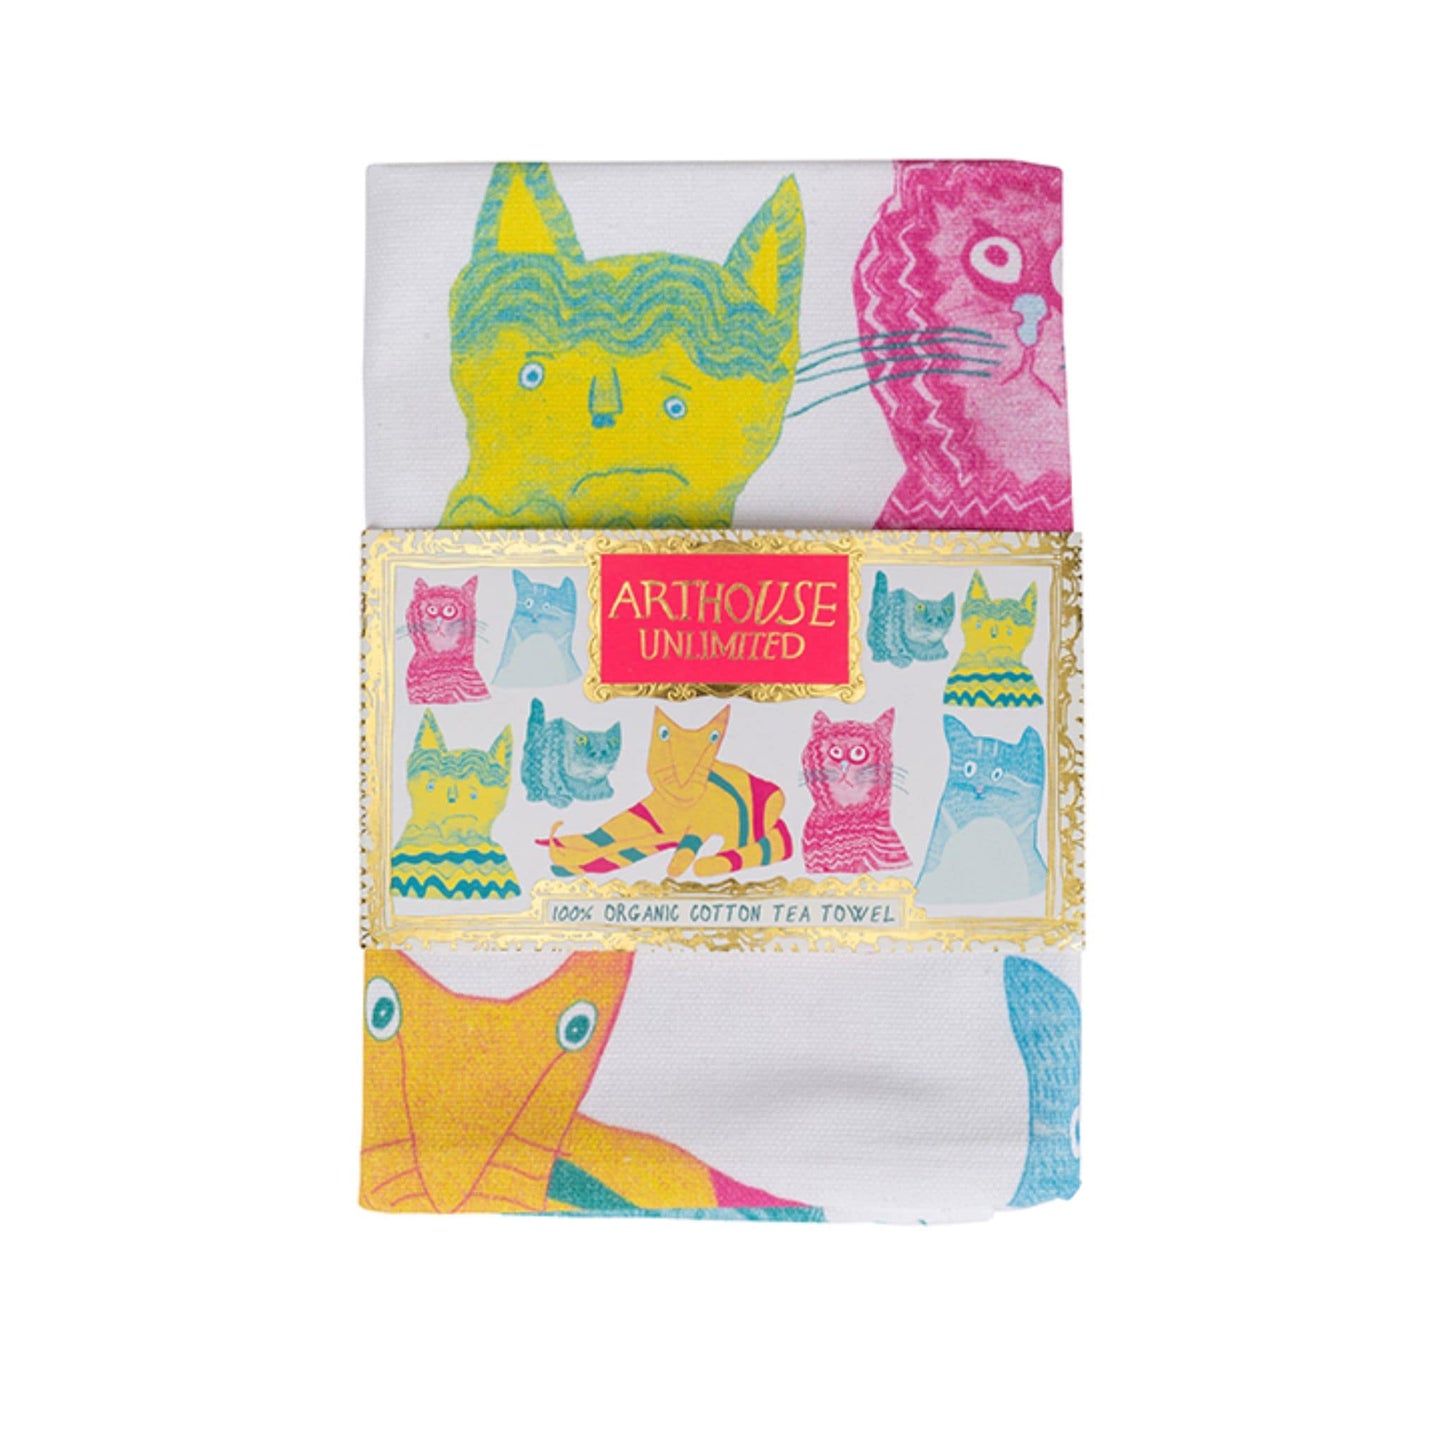  Miaow for Now  Organic Cotton Tea Towel - in packaging